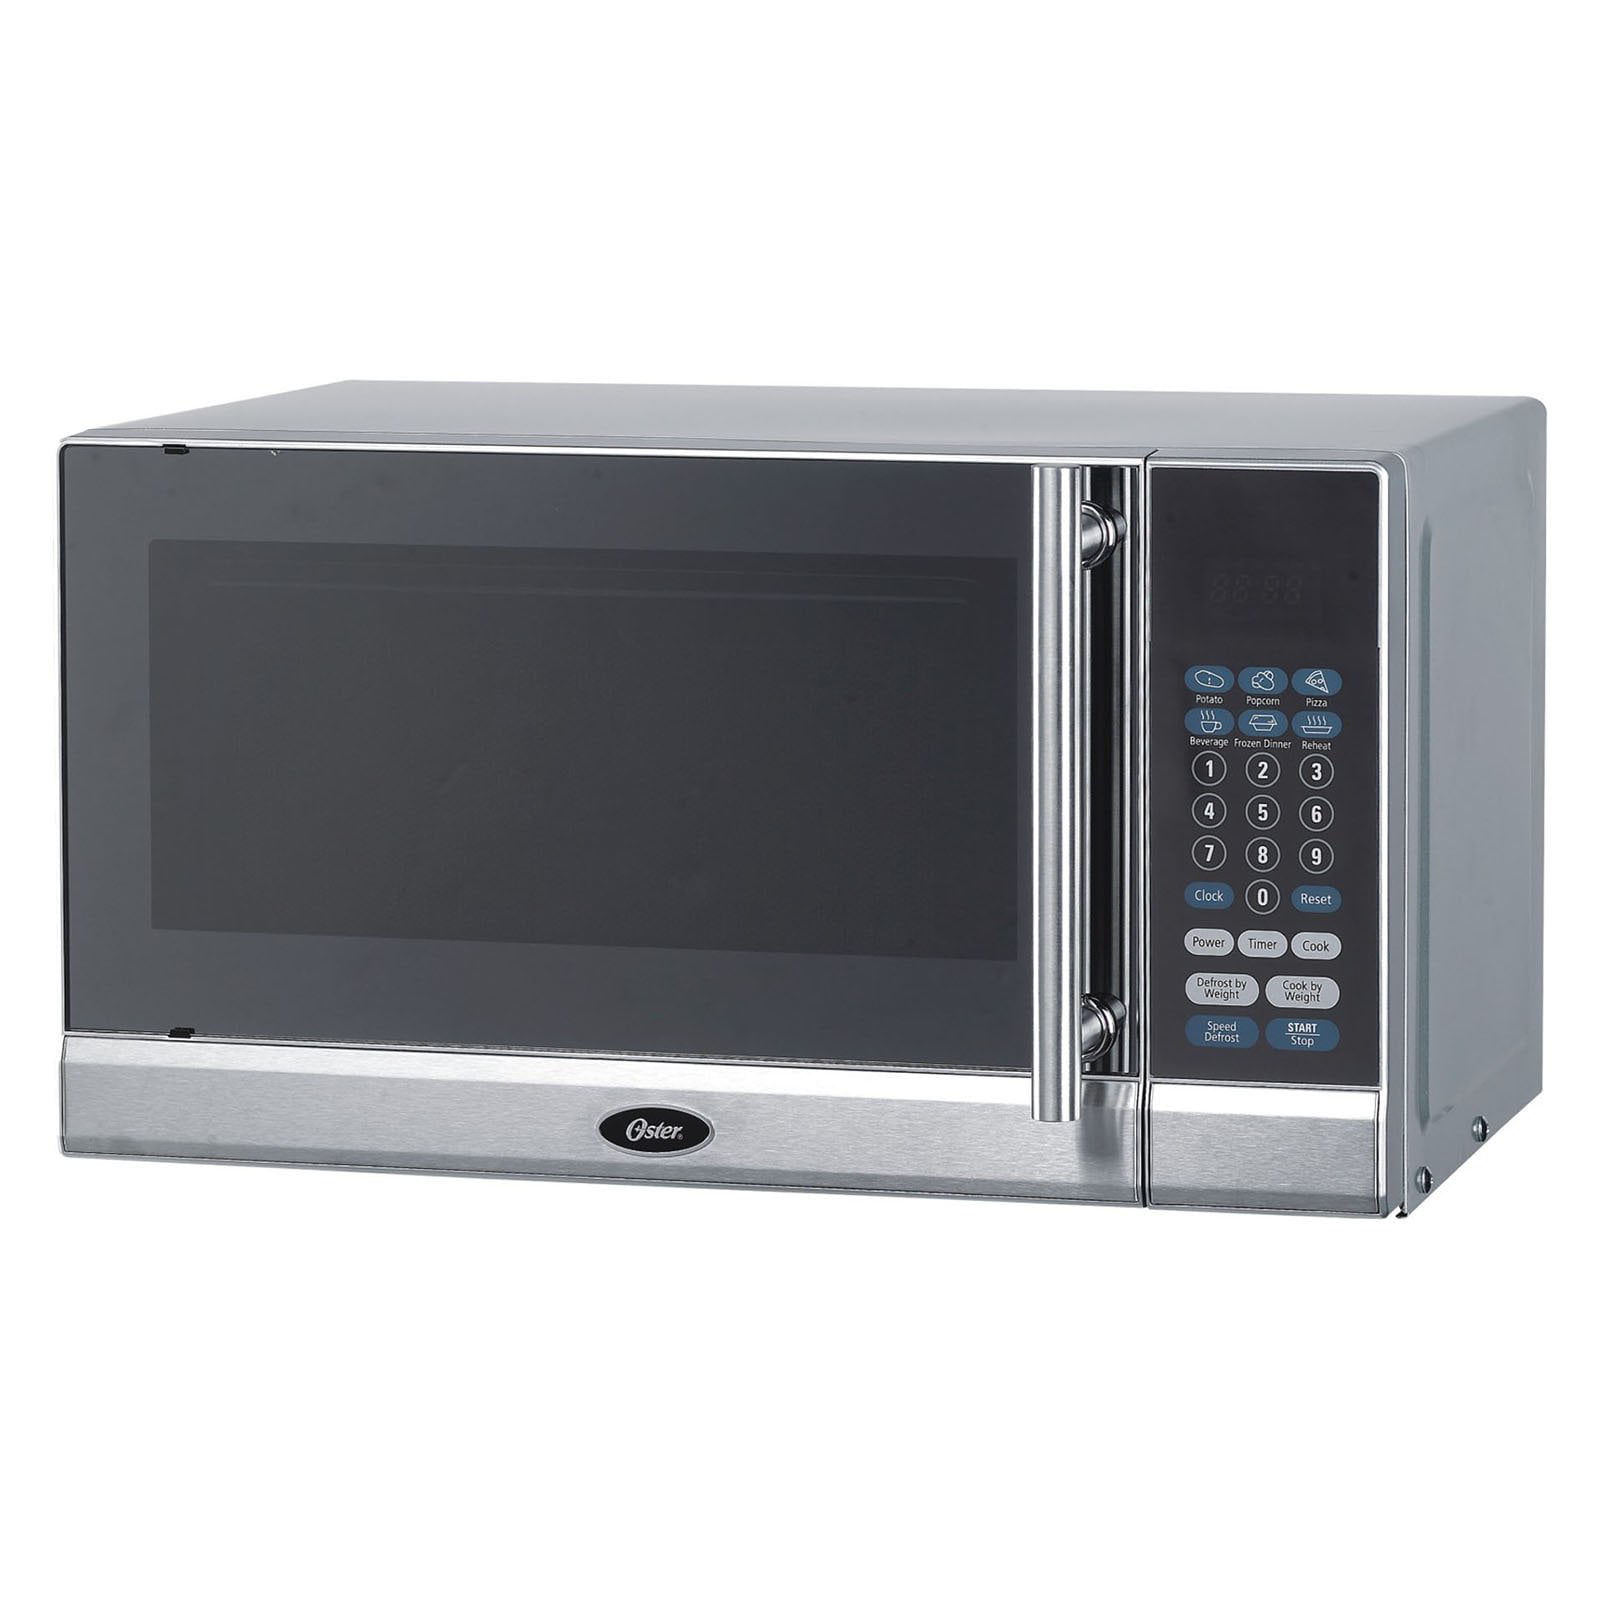 Oster Cu Ft Microwave Oven Stainless Steel Walmart